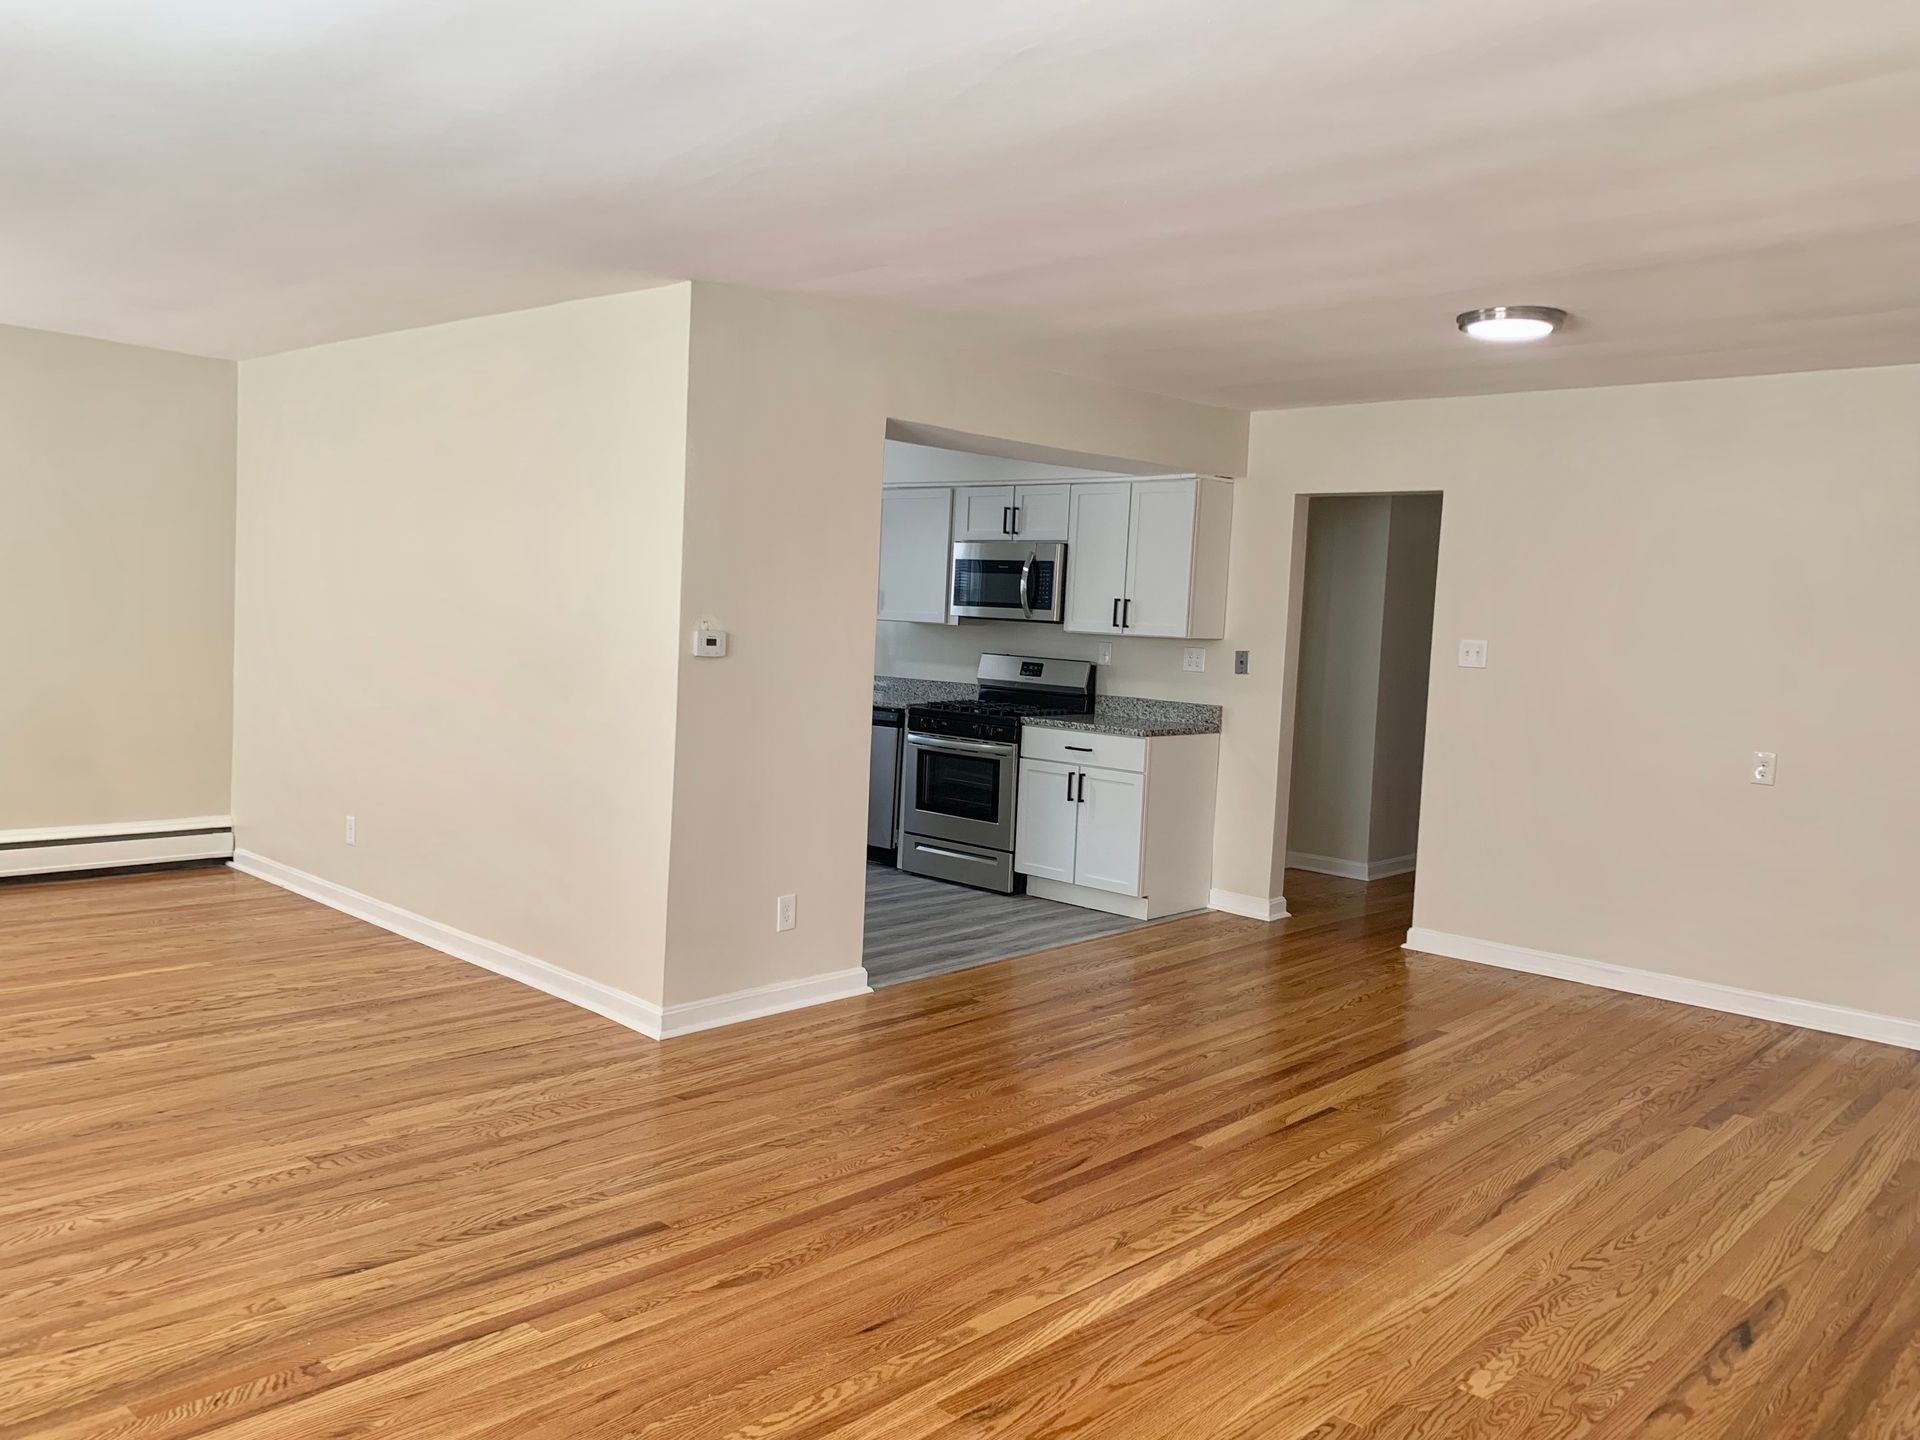 66-burdsall-avenue - Living room with open kitchen